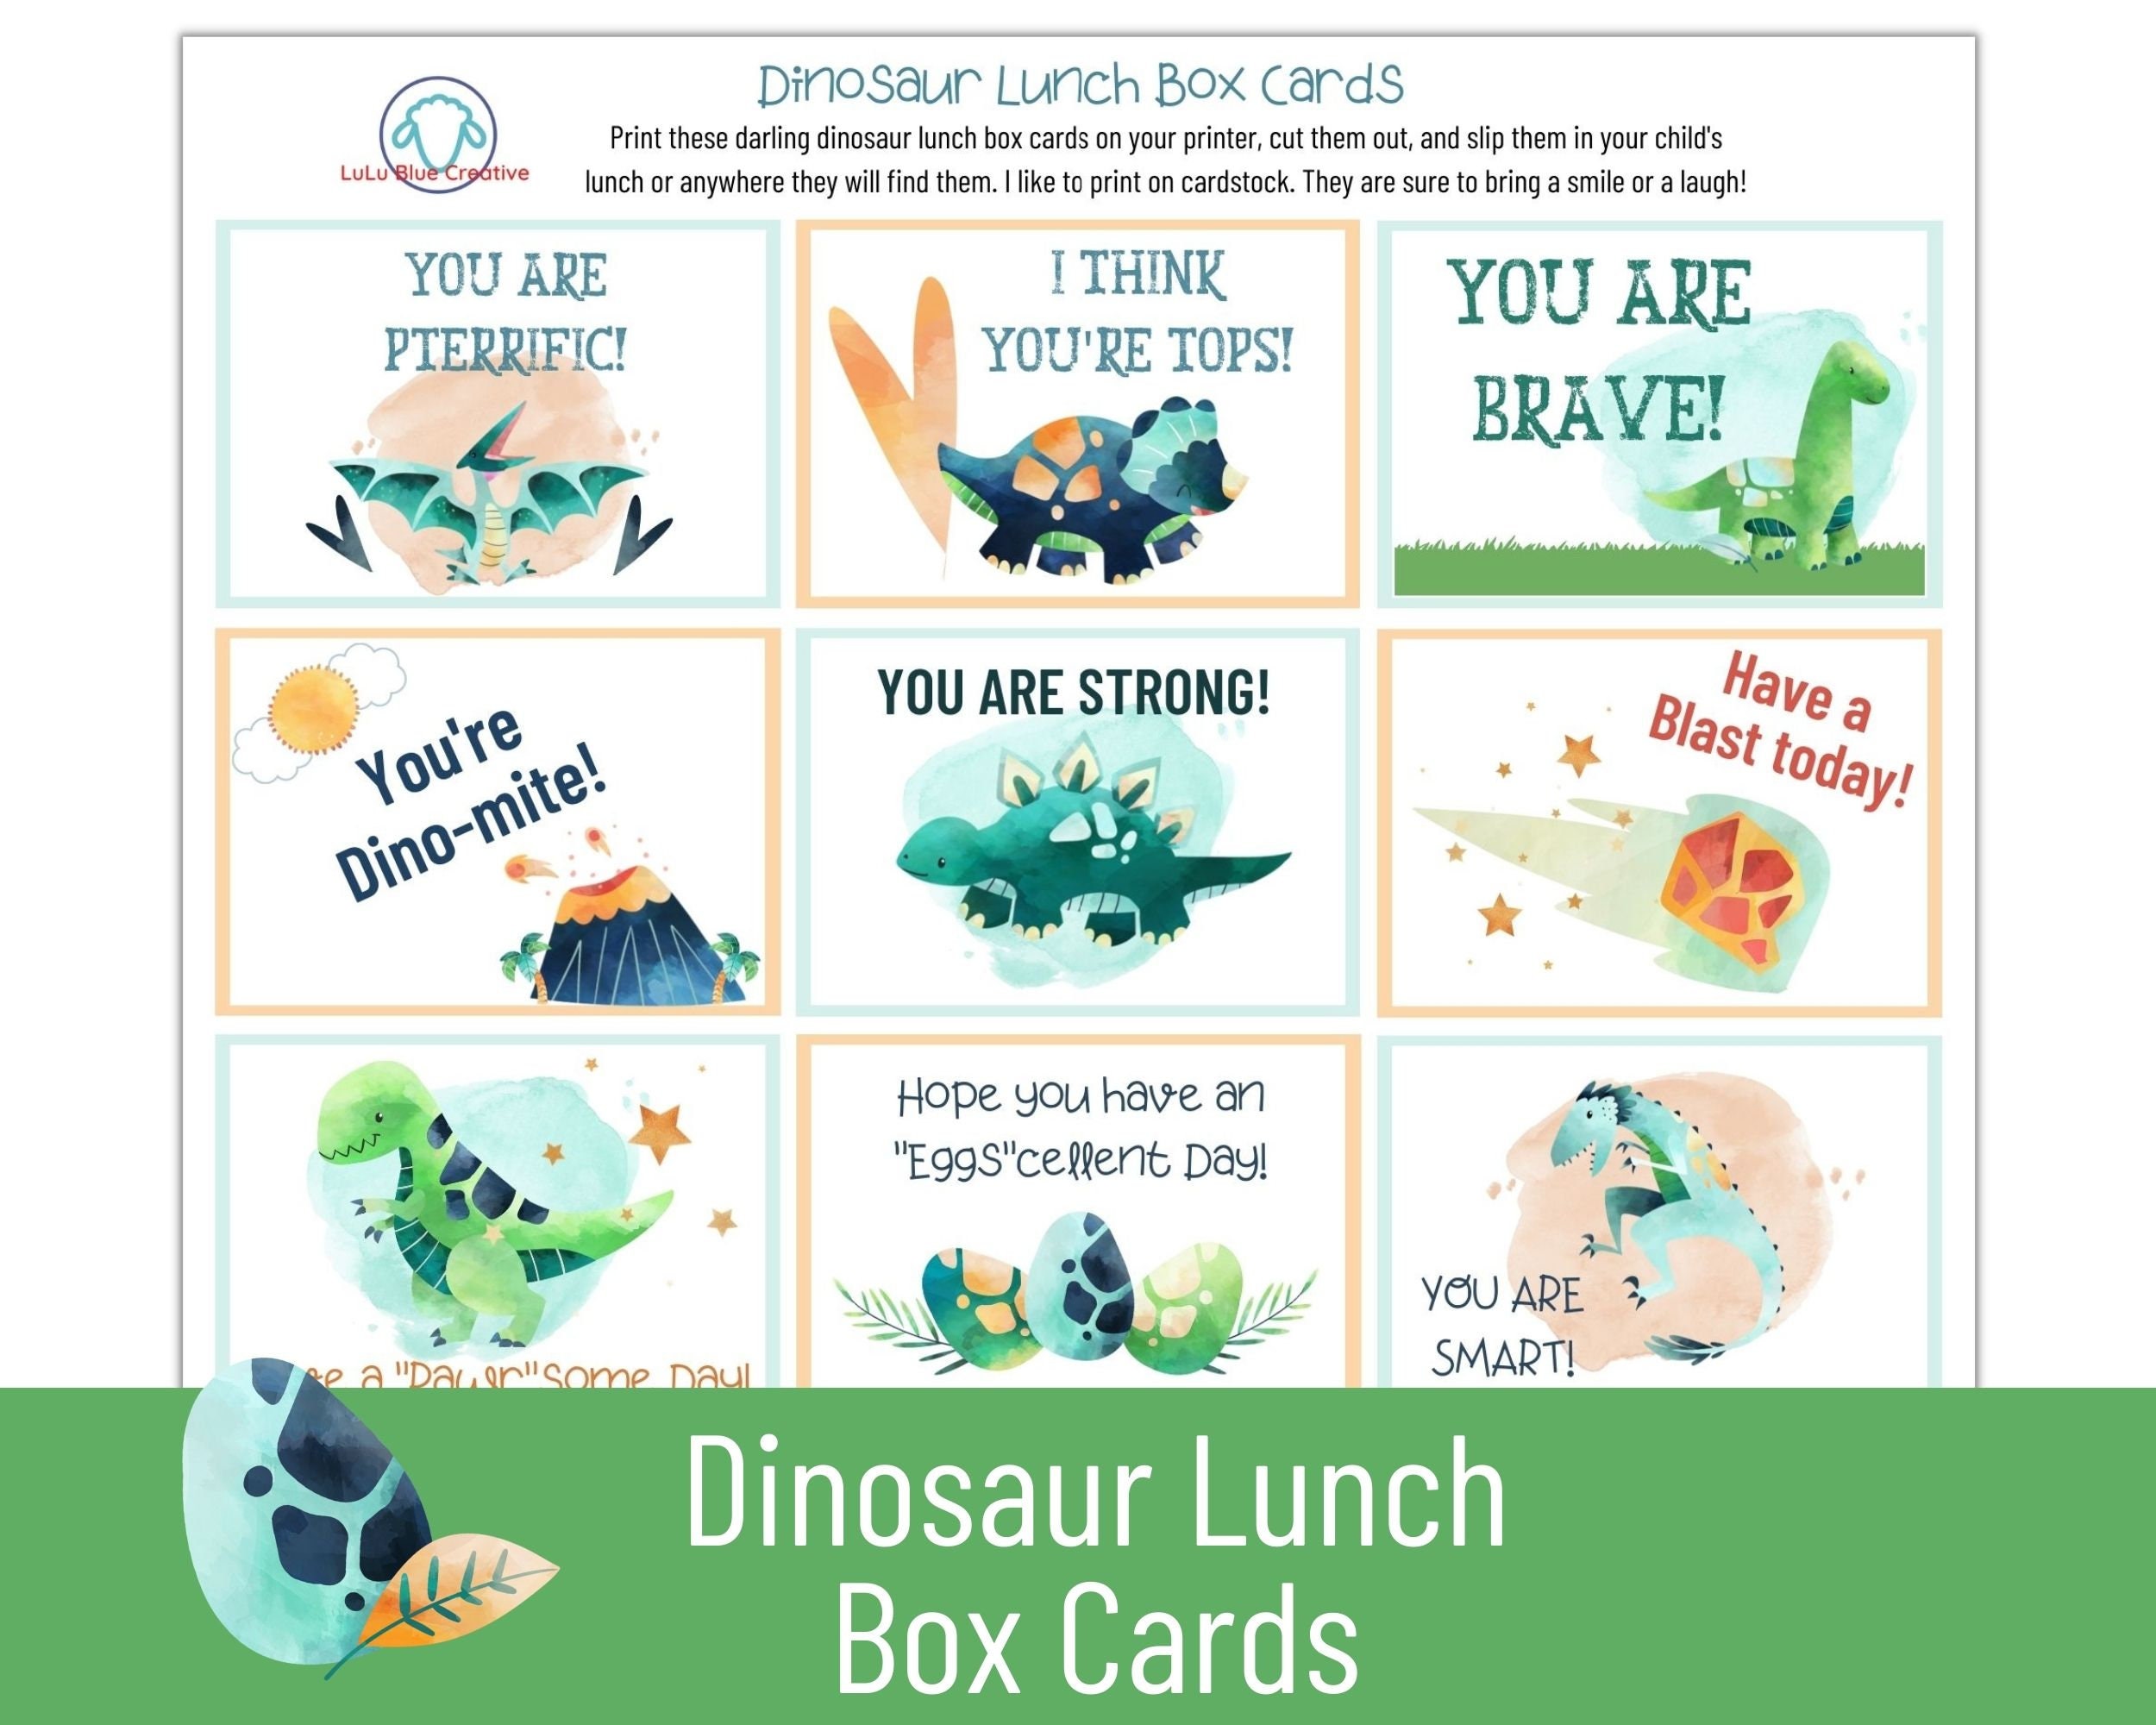 How to Make a Dinosaur Themed Lunchbox